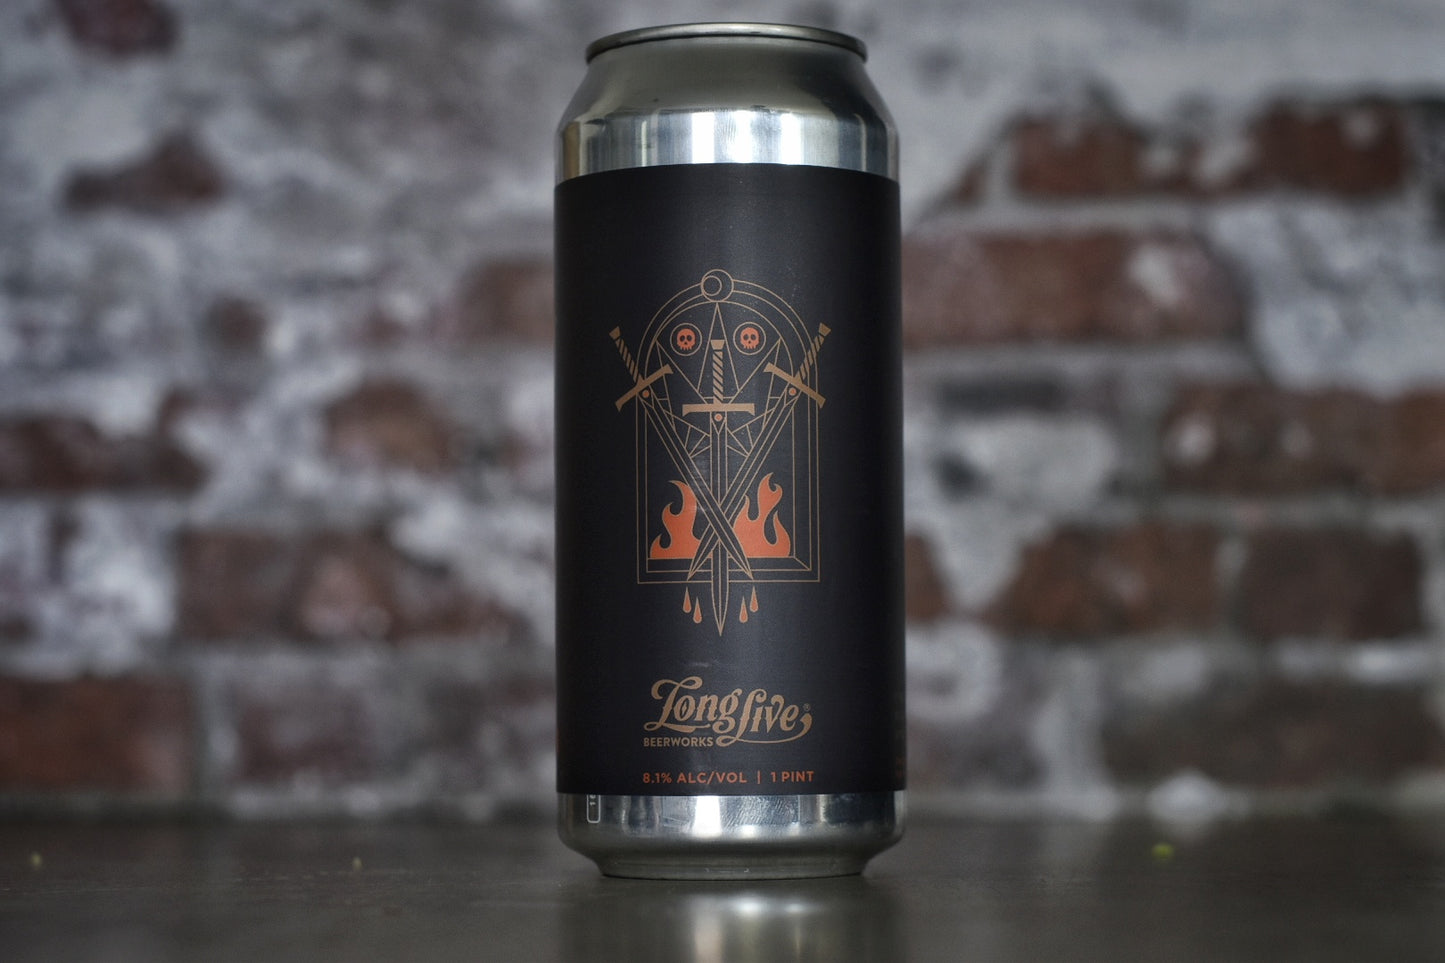 Long Live Beerworks - Fire, Blood and Steel